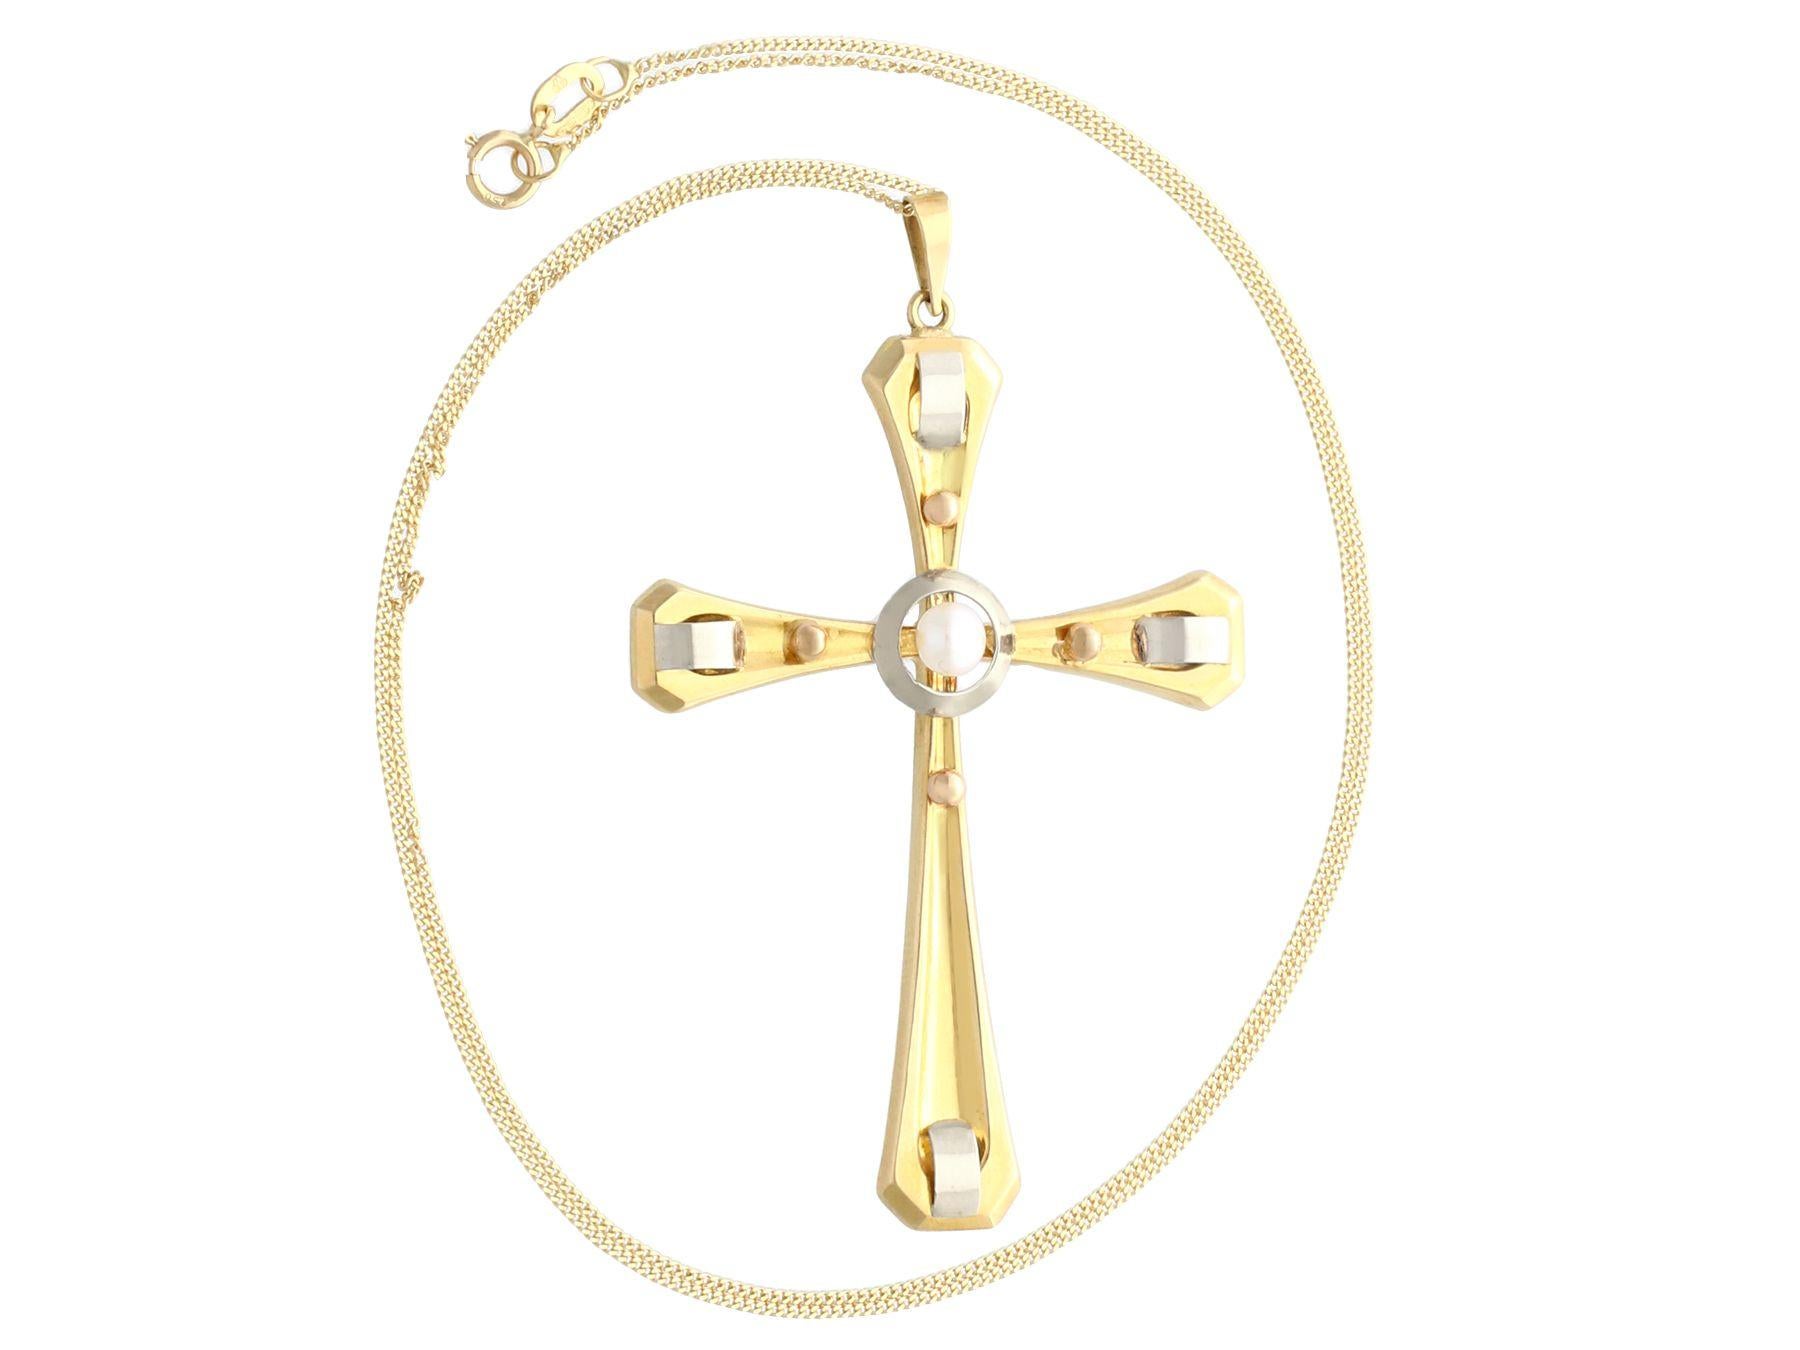 A fine and impressive seed pearl and 18 karat yellow gold cross pendant with 18 karat white gold and 18 karat rose gold applied decoration; part of our diverse vintage jewellery and estate jewelry collections

This fine and impressive vintage cross